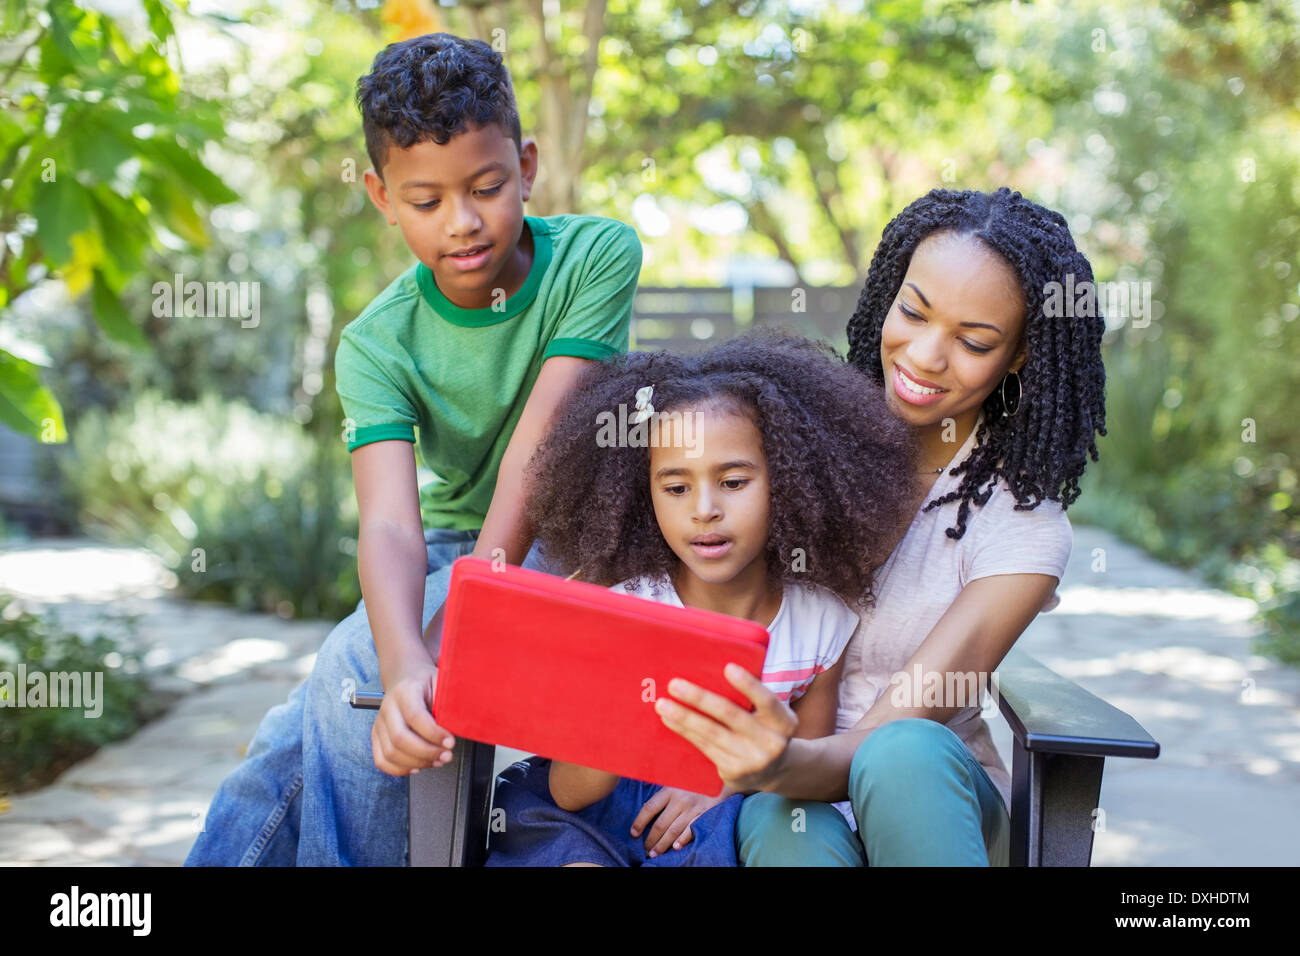 Mother and children using digital tablet outdoors Stock Photo